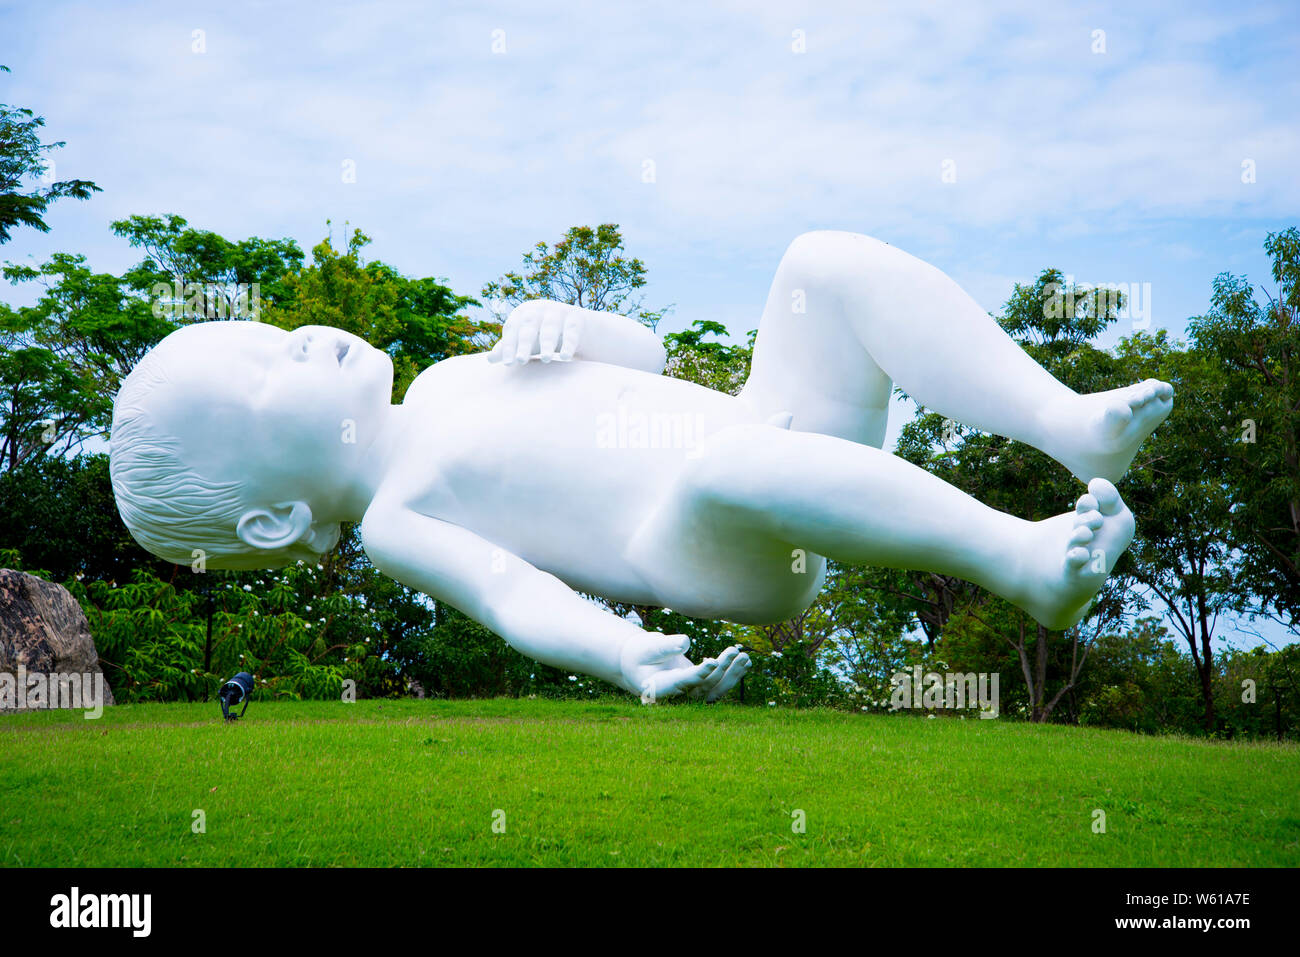 SINGAPORE CITY, SINGAPORE - April 12, 2019: 'Planet' sculpture is an oversized baby floating in the air created by Marc Quinn Stock Photo